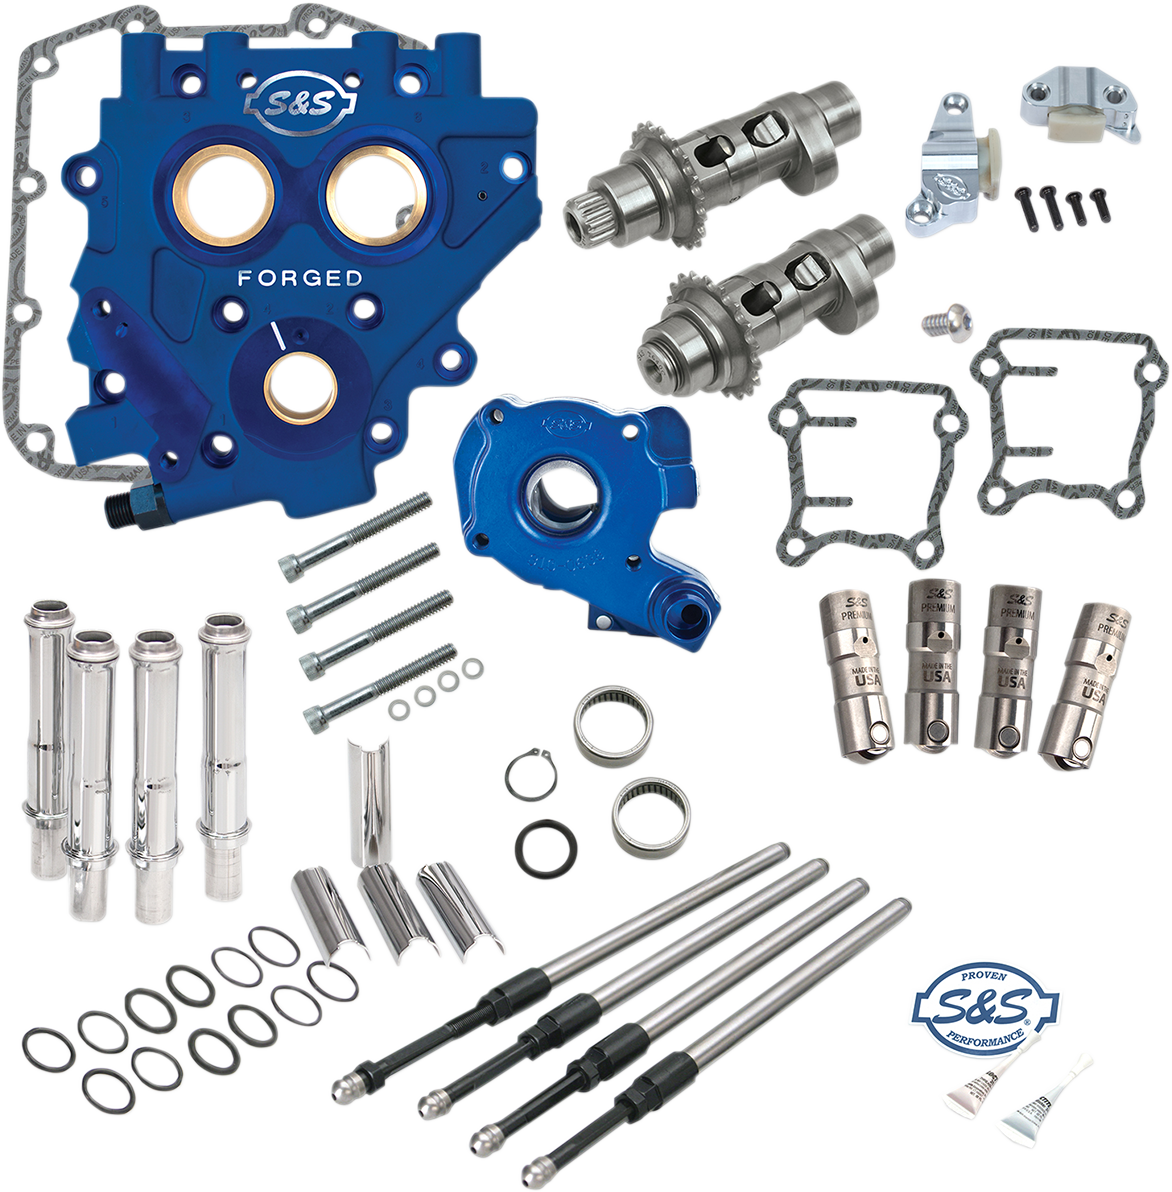 S&S CYCLE Cam Chest Kit - 585 EZ Start - Chain Drive 330-0546